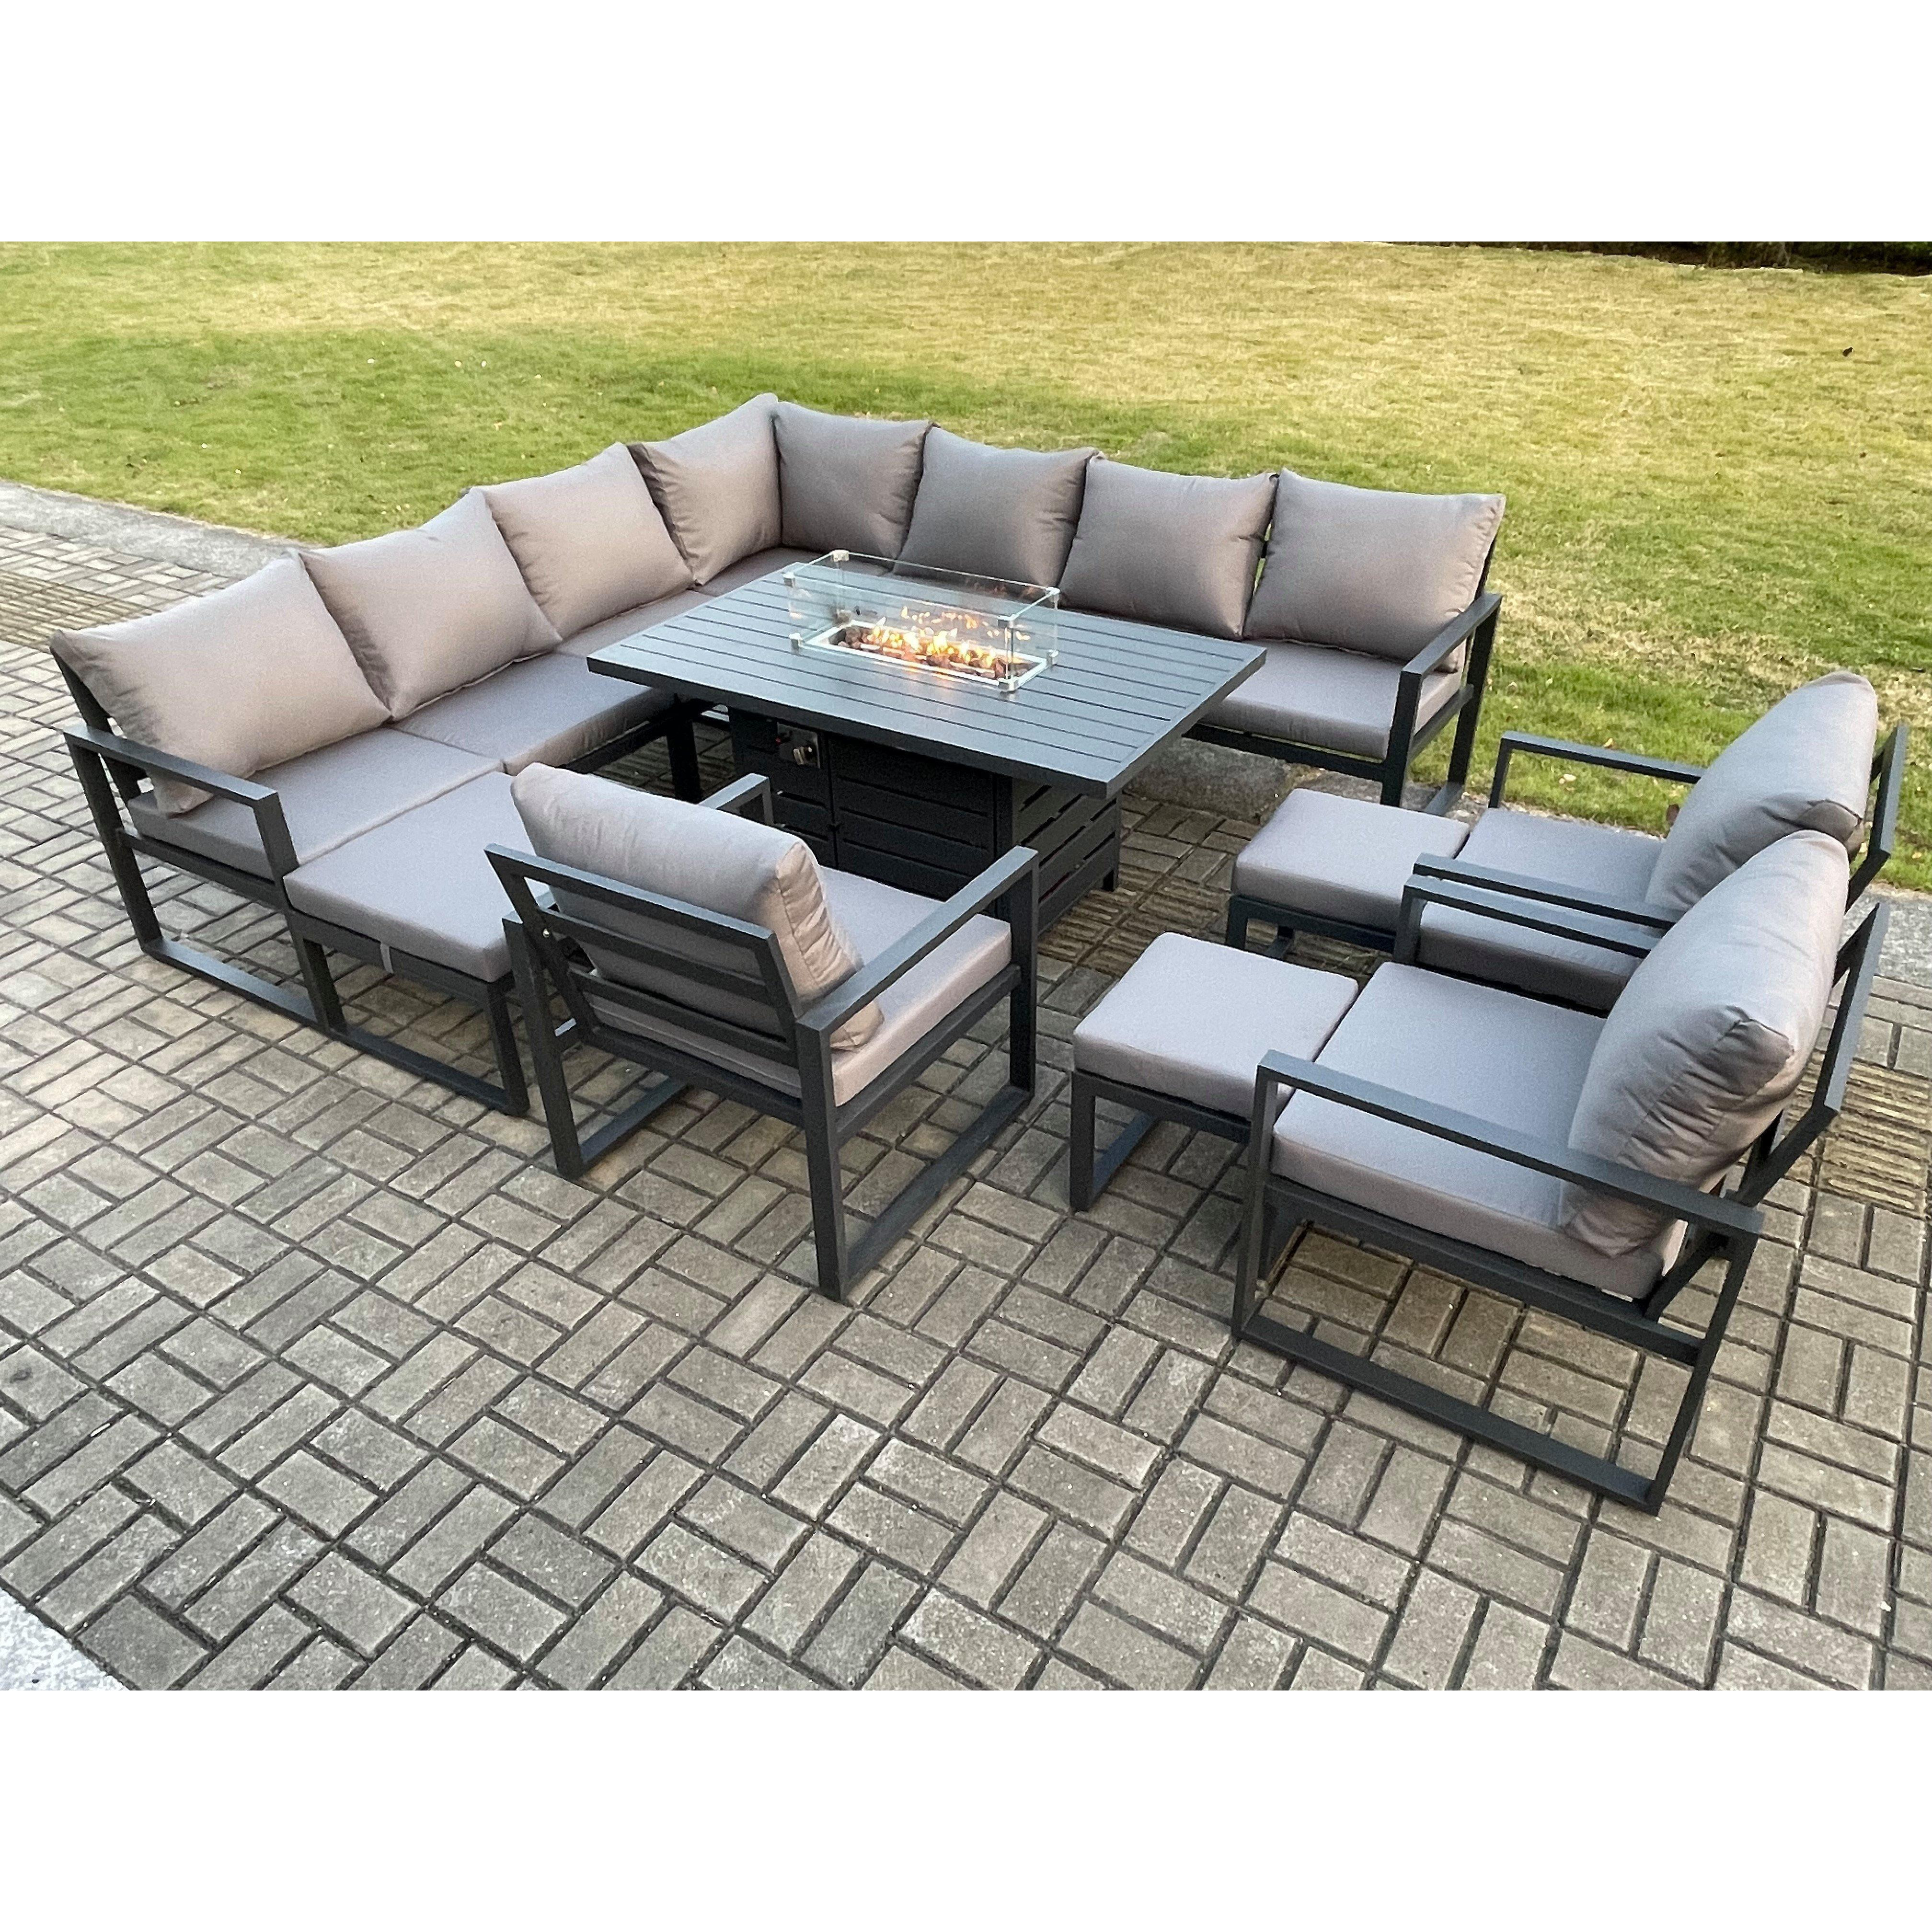 Aluminium Lounge Corner Sofa Outdoor Garden Furniture Sets Gas Fire Pit Dining Table Set with 3 Chairs 3 Footstools Dark Grey - image 1